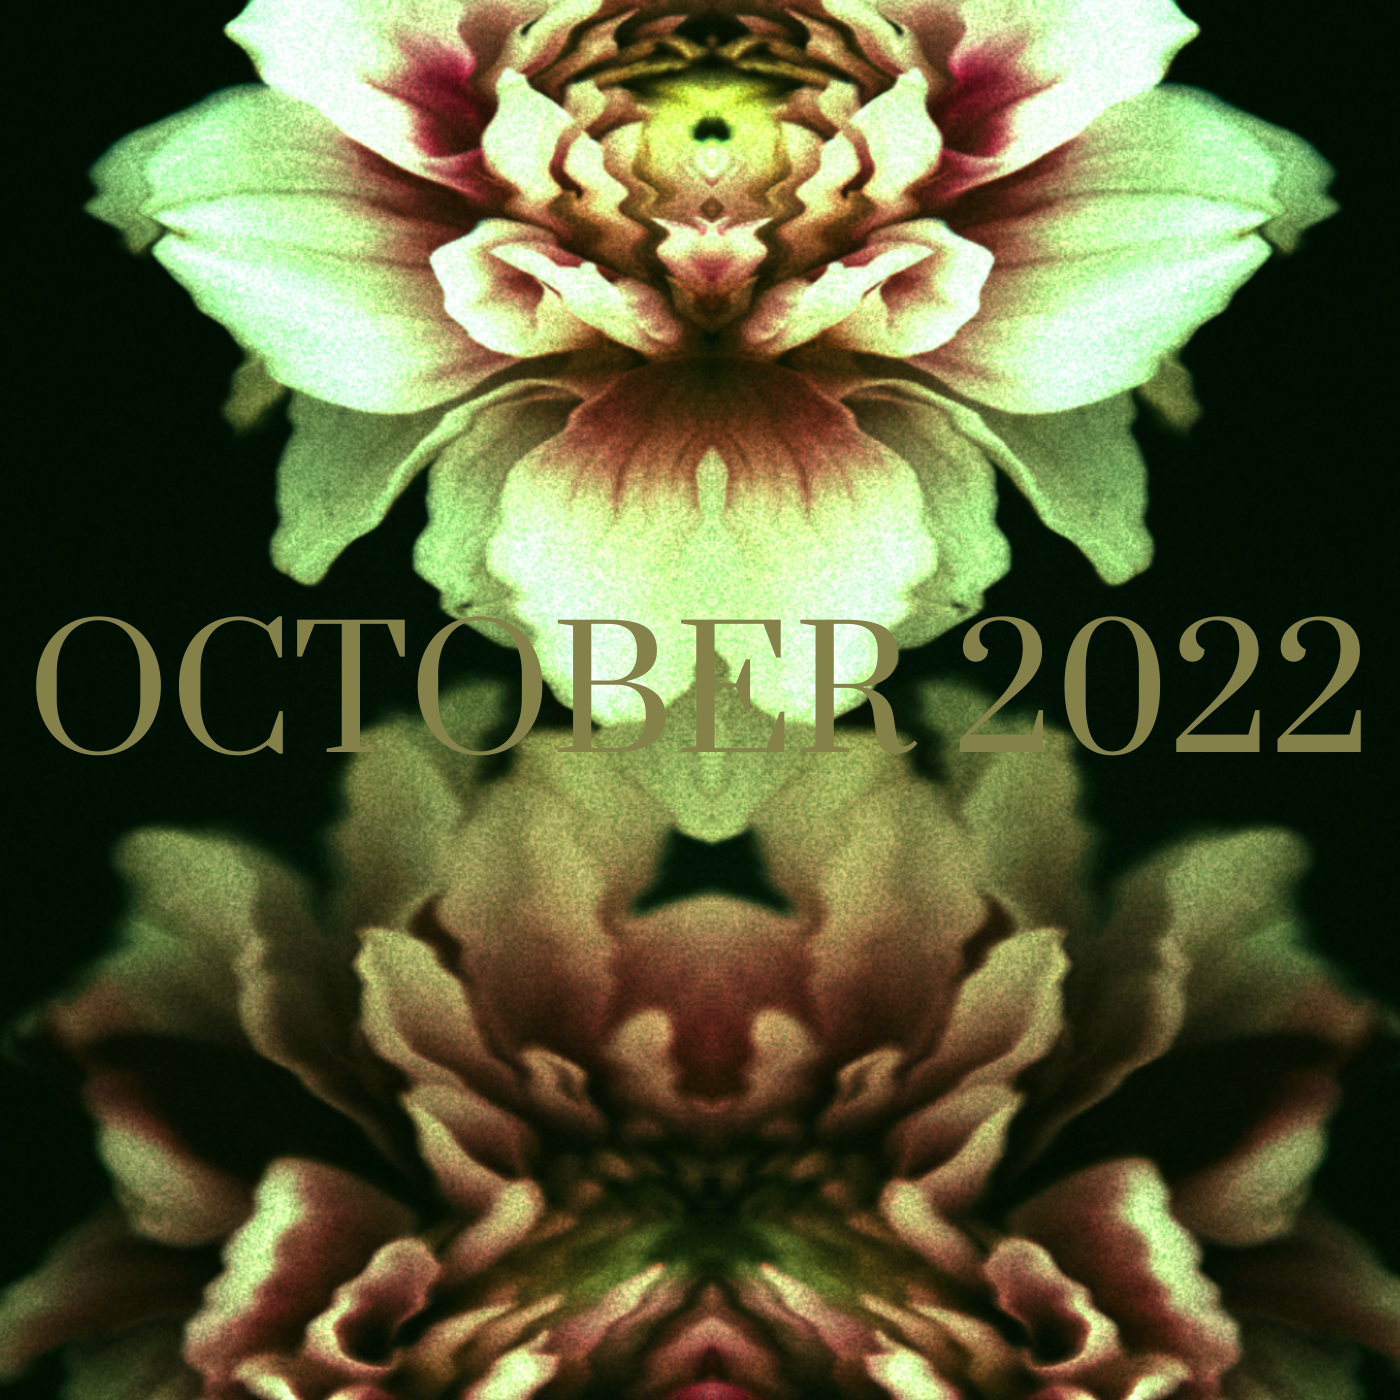 a glitchy image of mirrored peonies in grungy reds and greens, the upper flower has a quality that makes it look like an eye, october 2022 is across the center of the image in an olve green serif font